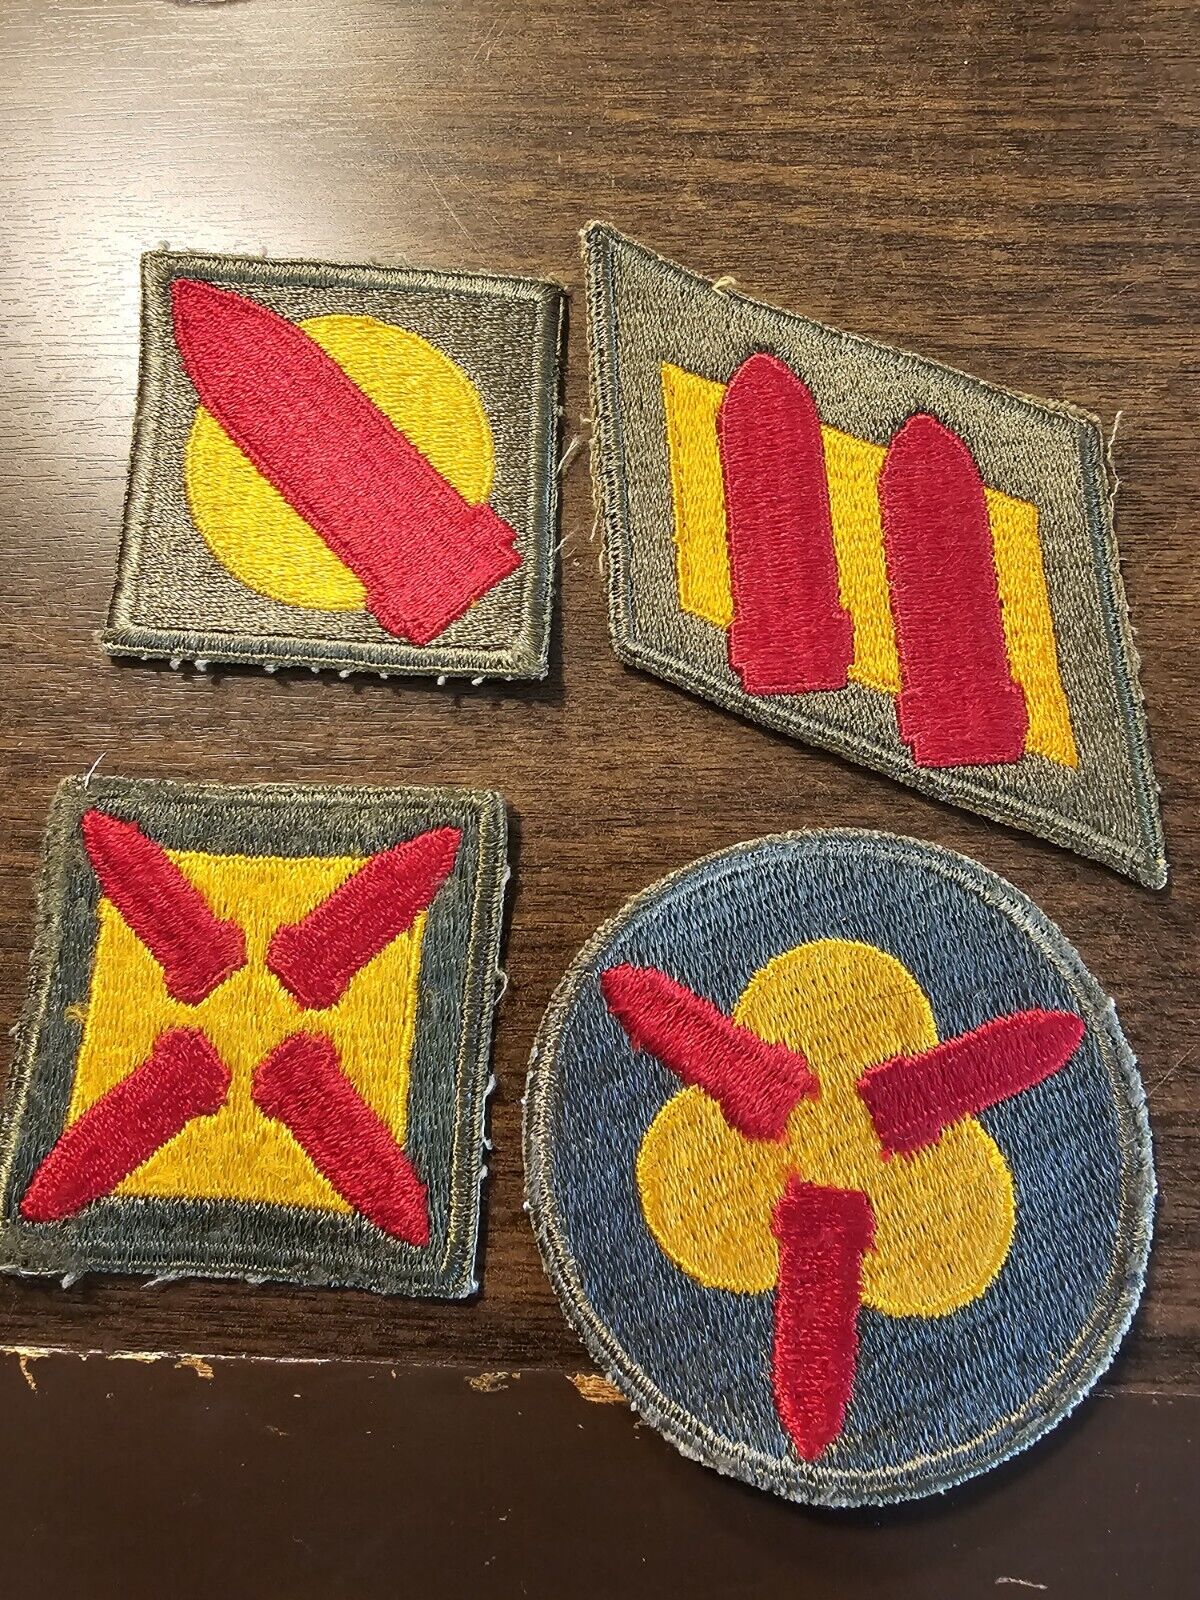 WWII 1960s US Army Vietnam Cold War Era Division Commamd Patch Lot L@@K 1A